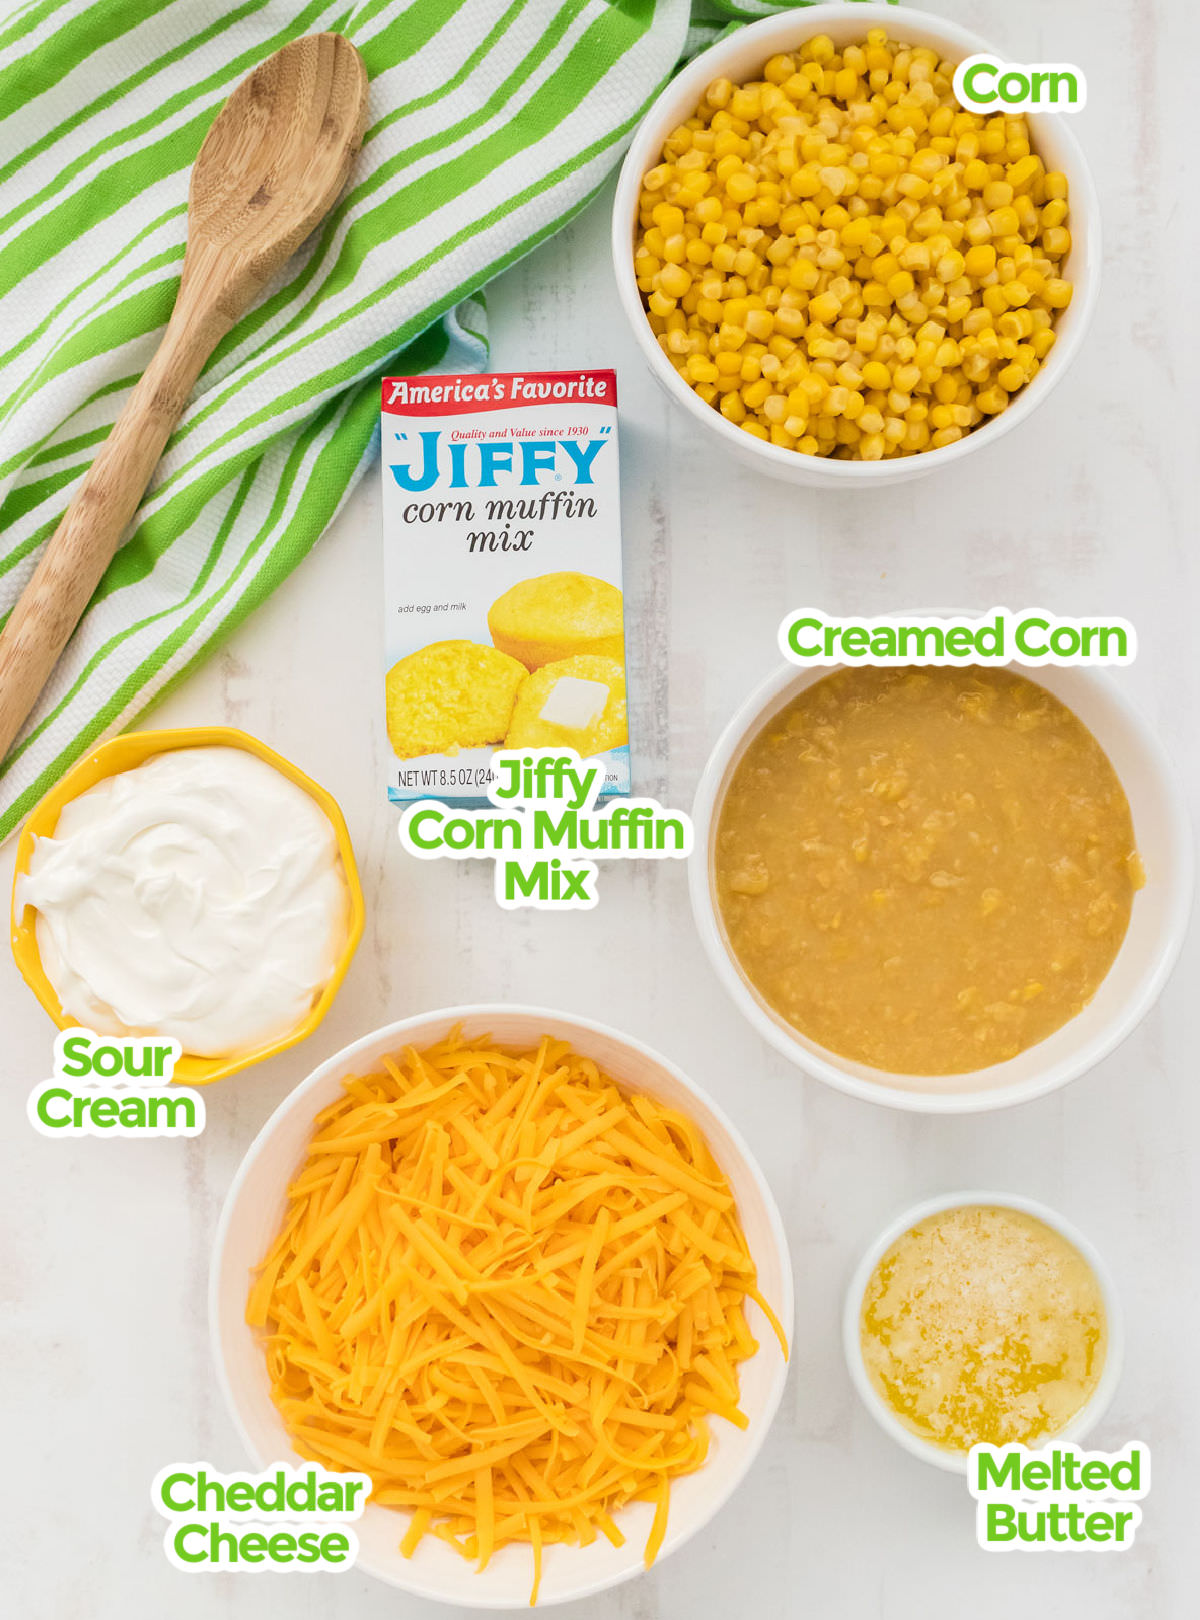 All the ingredients you will need to make Corn Casserole including Corn, Creamed Corn, Jiffy Corn Muffin Mix, Sour Cream, Melted Butter and Grated Cheddar Cheese.